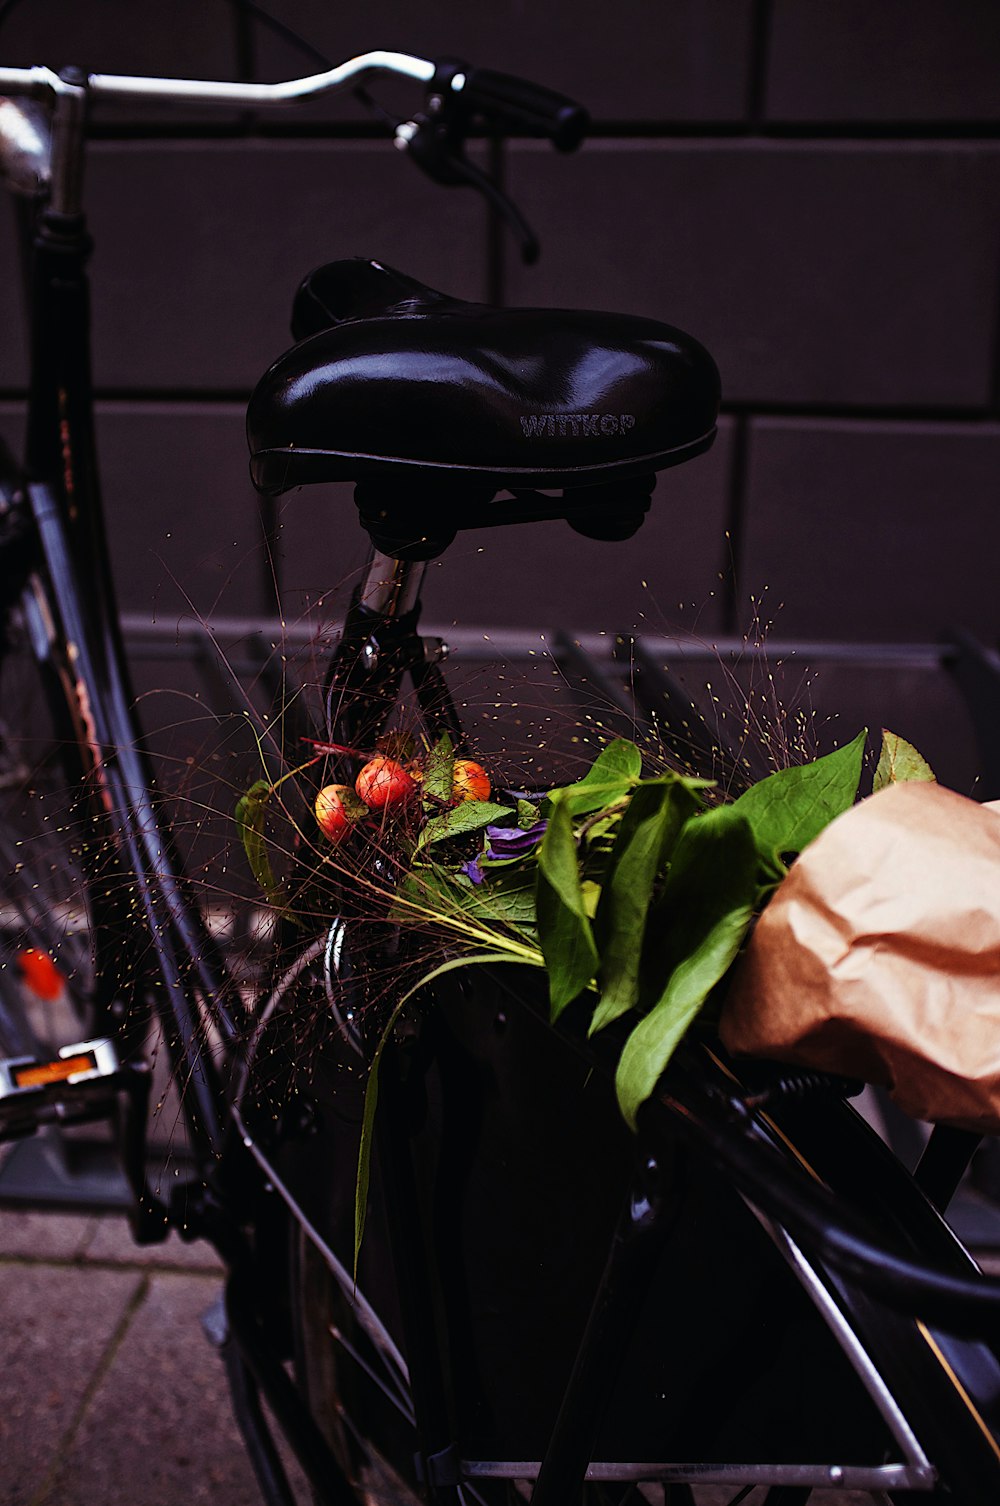 a close up of a bicycle with a bag on the back